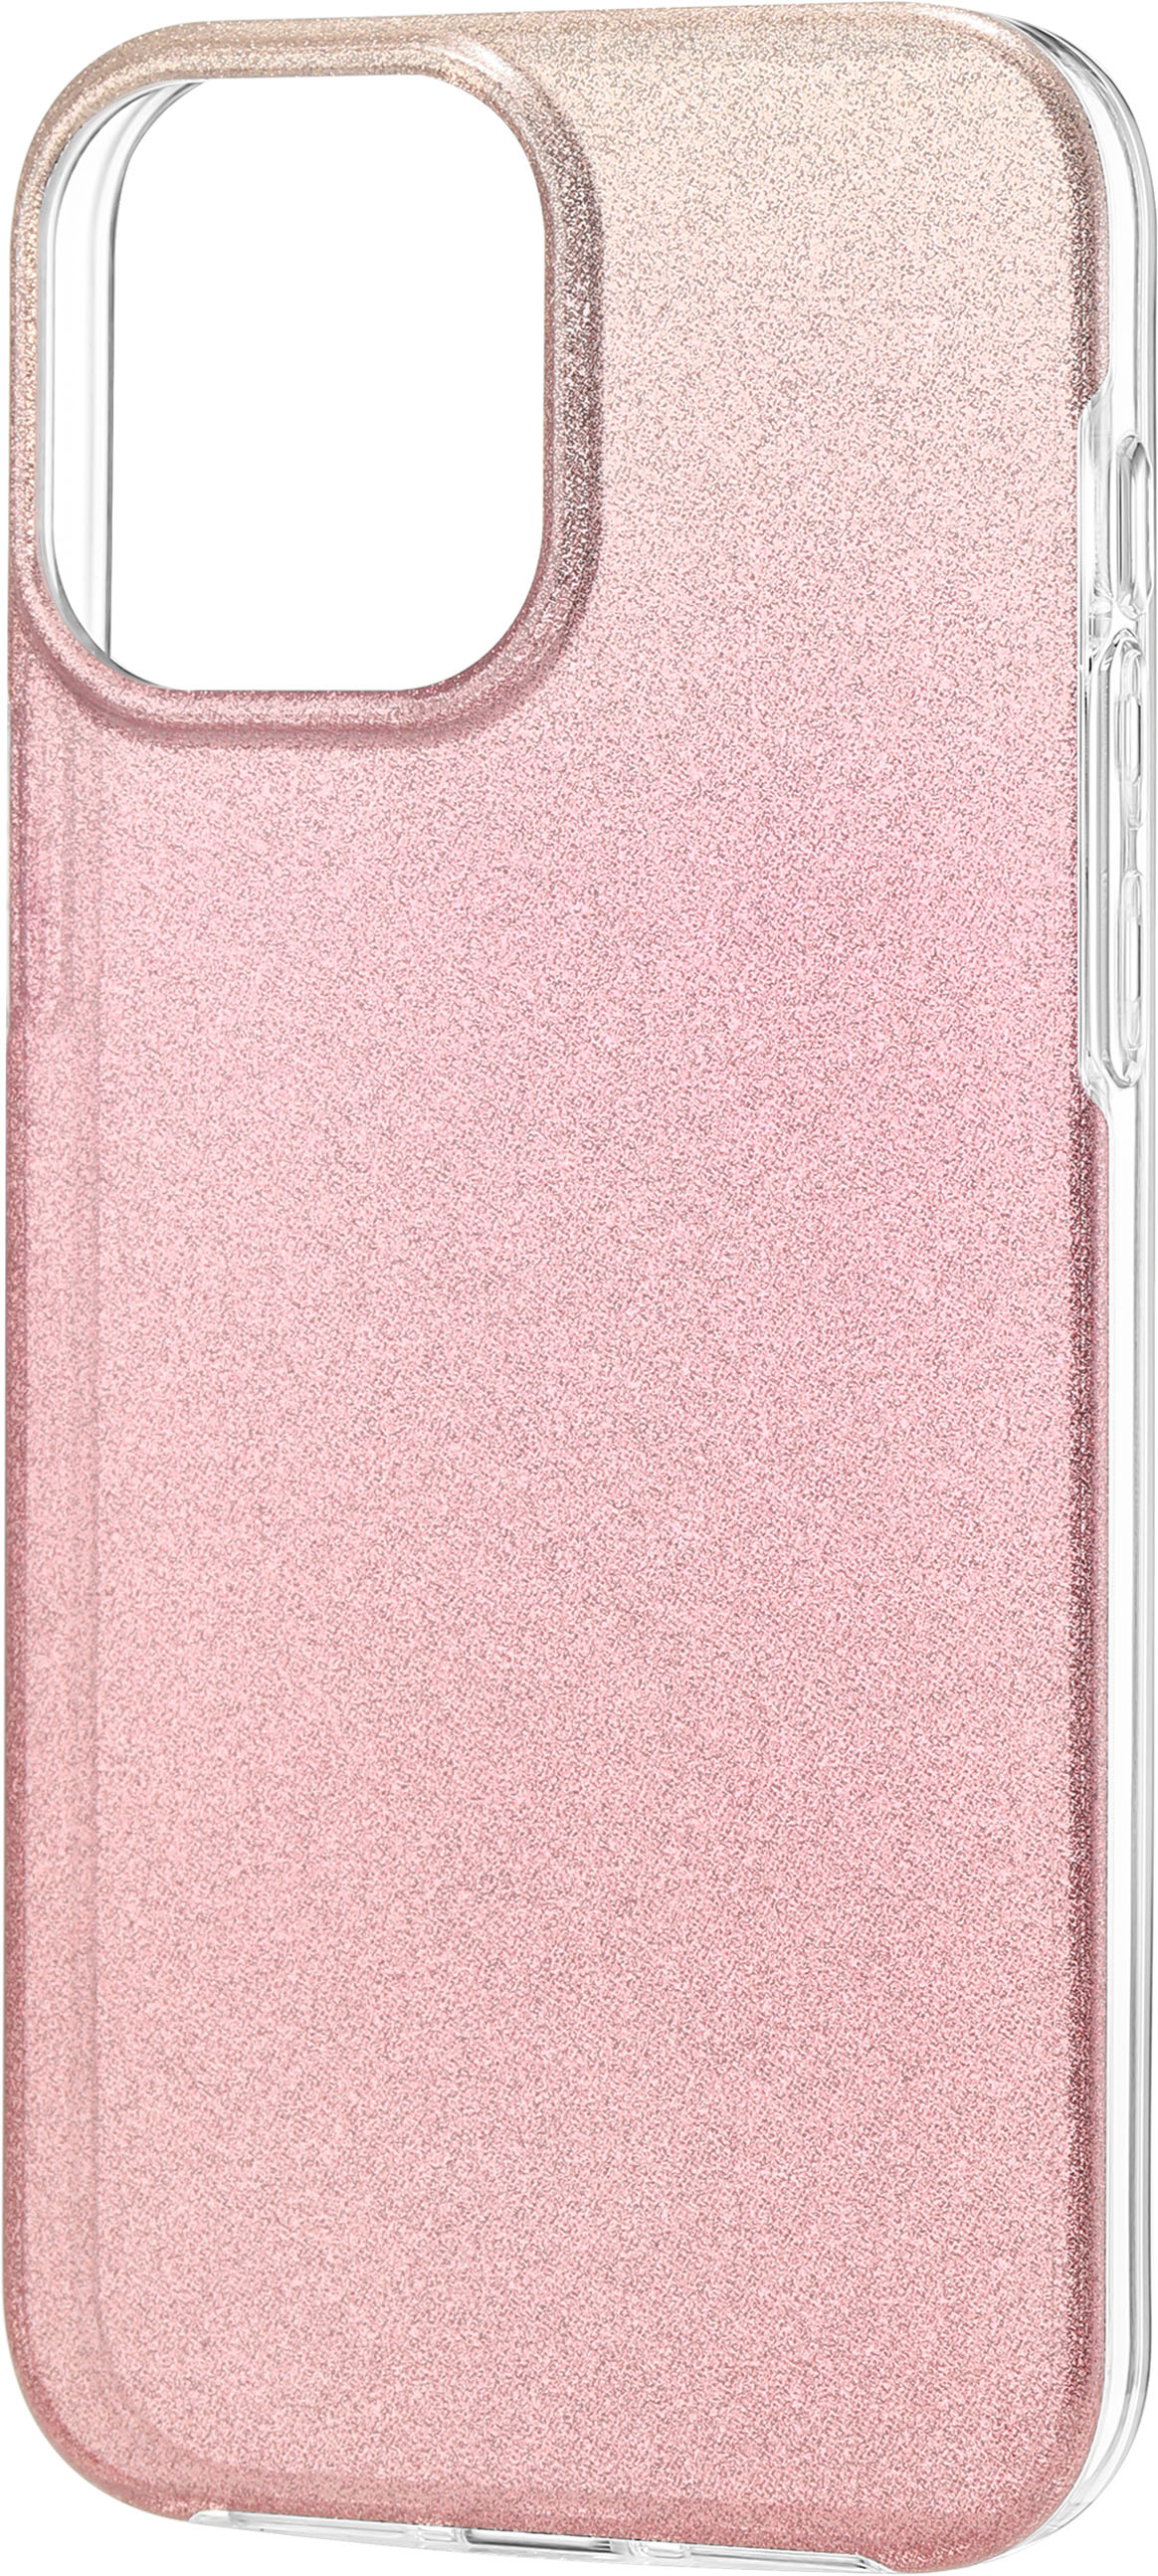 Insignia Hard Shell Case For Iphone 13 Pro Max And Iphone 12 Pro Max Gradient Rose Gold Glitter Ns Max13gcrg Best Buy